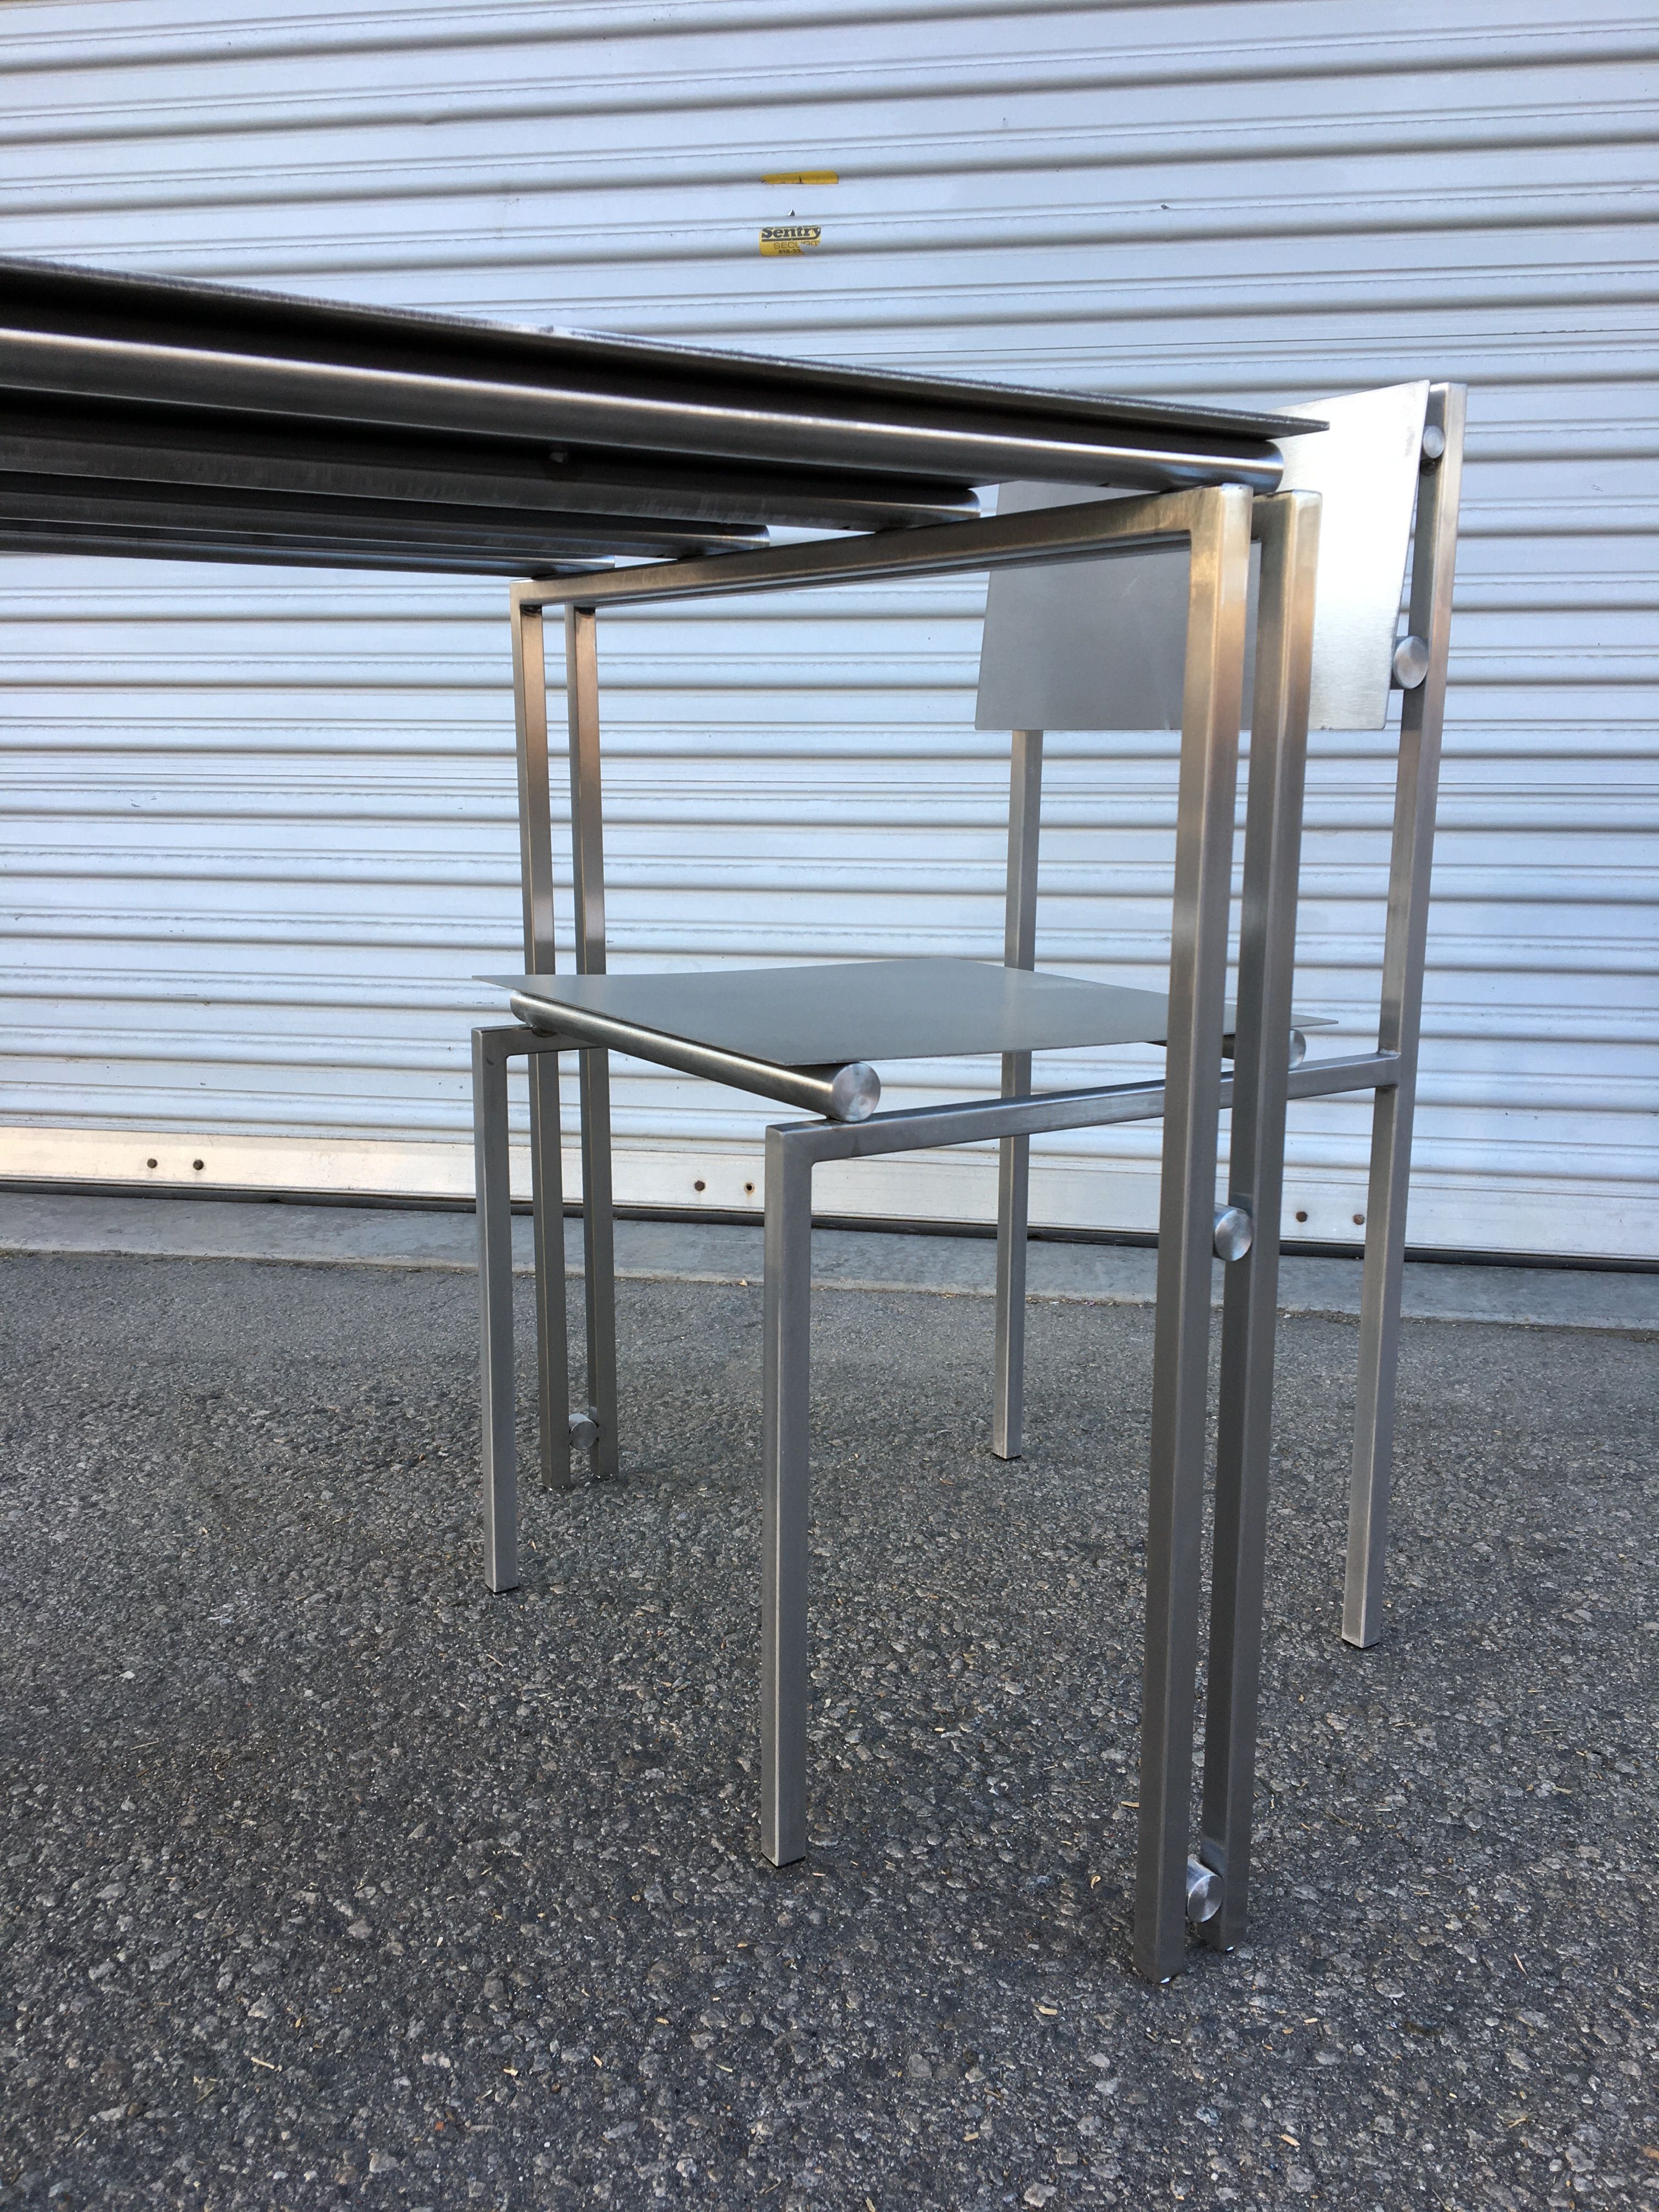  Stainless Steel Suspension Set product image 7